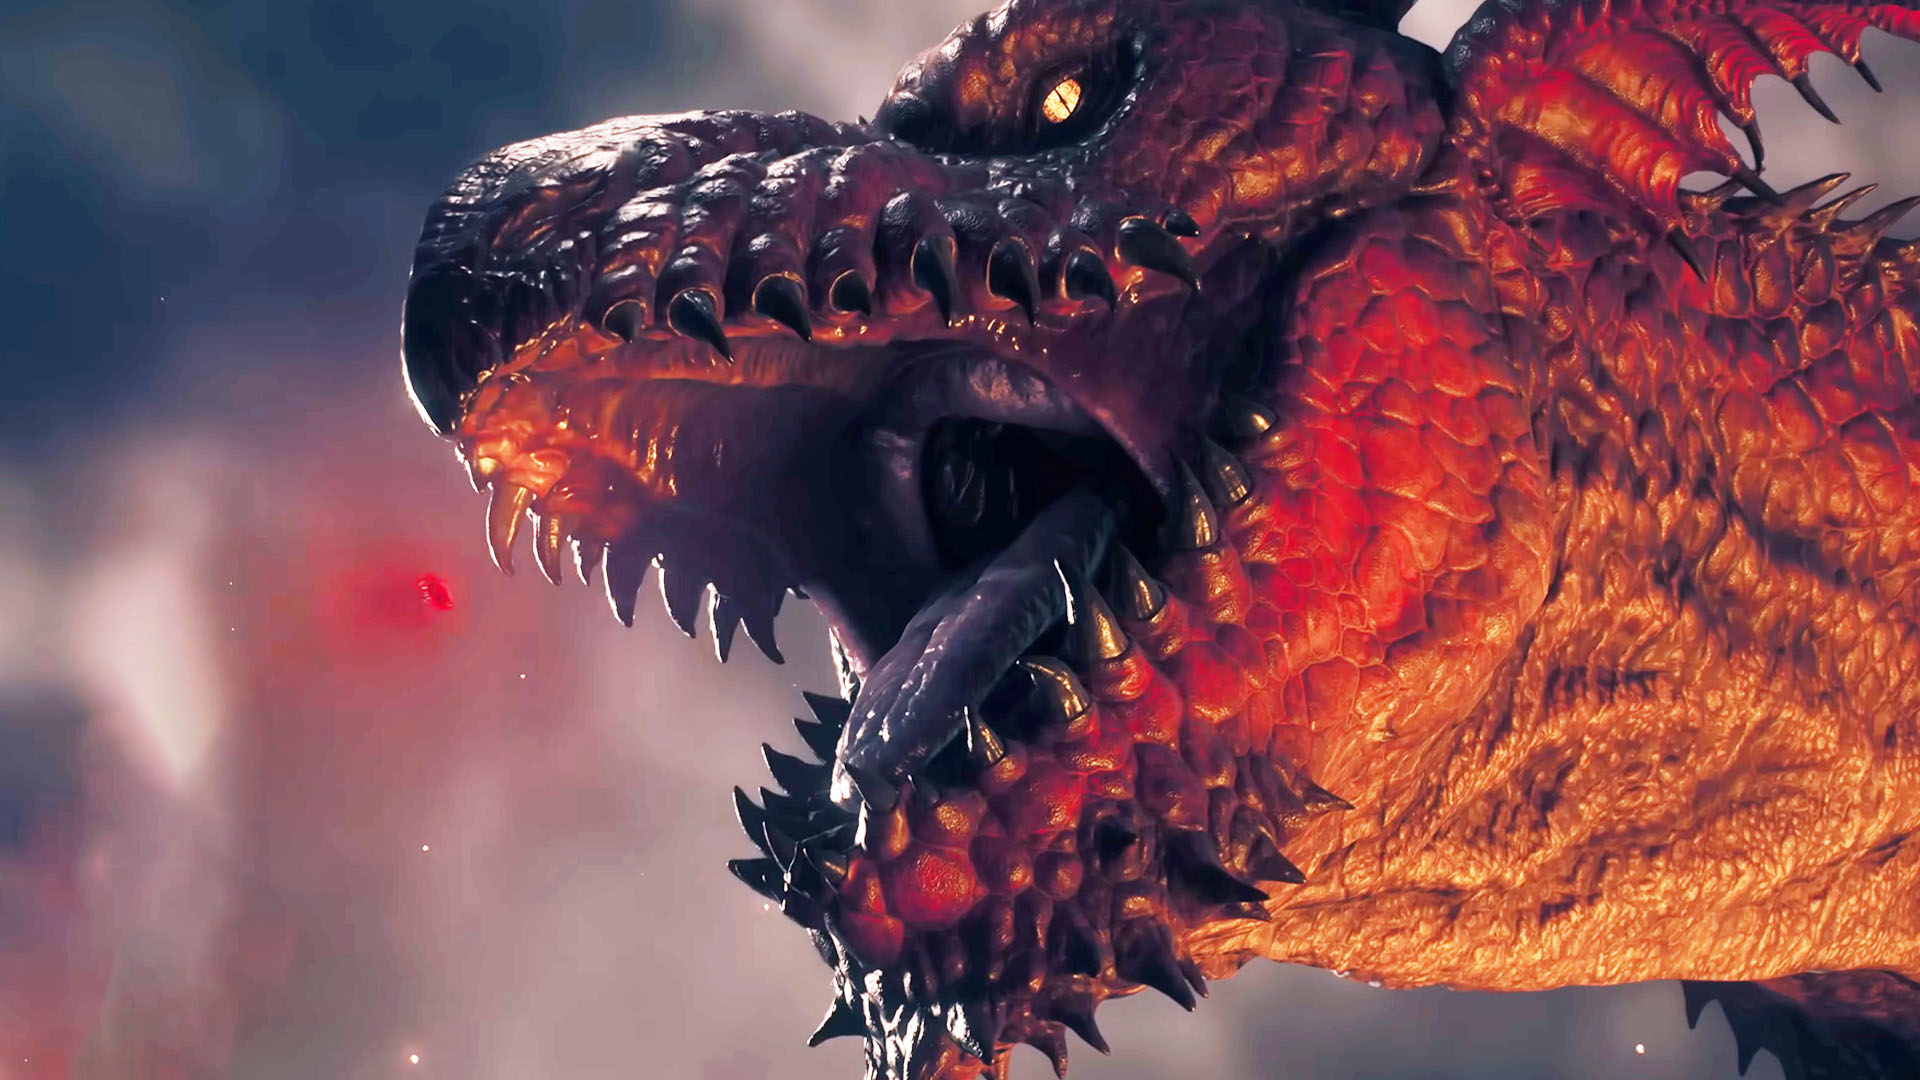 Dragon’s Dogma 2 release date speculation, trailers, gameplay, story